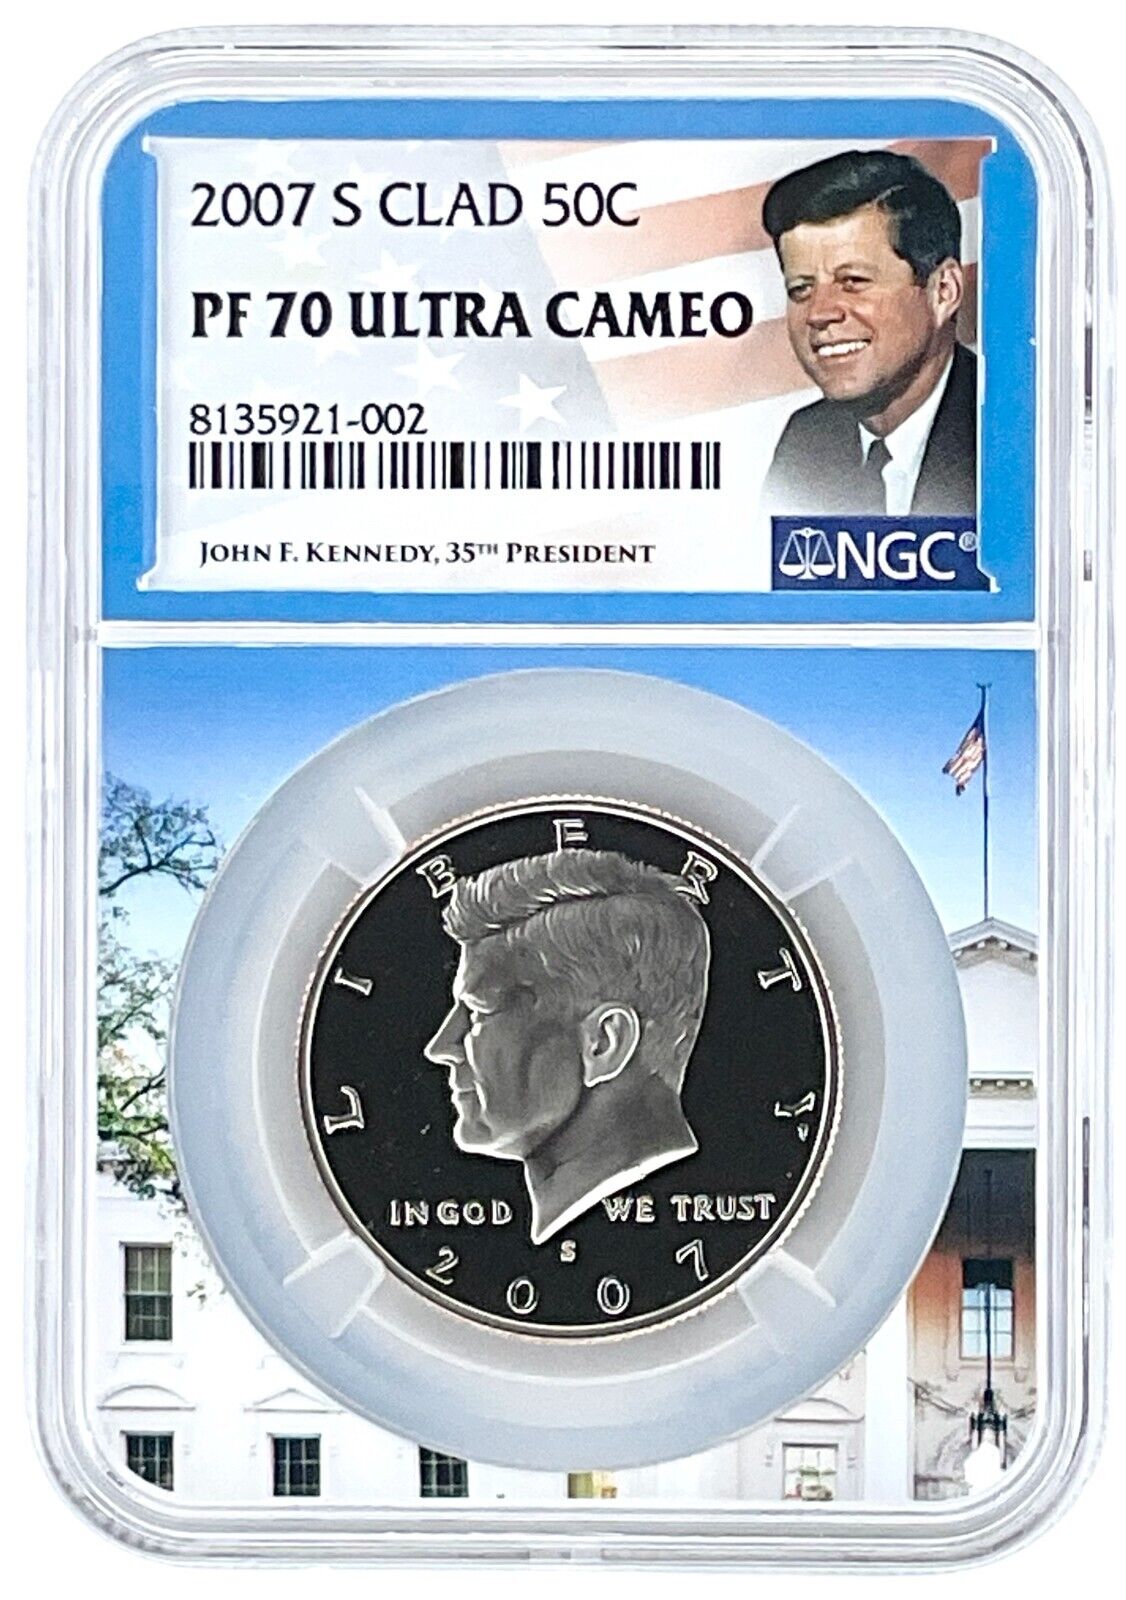 2007 S Kennedy Clad Half Dollar NGC PF70 Ultra Cameo White House Picture Core